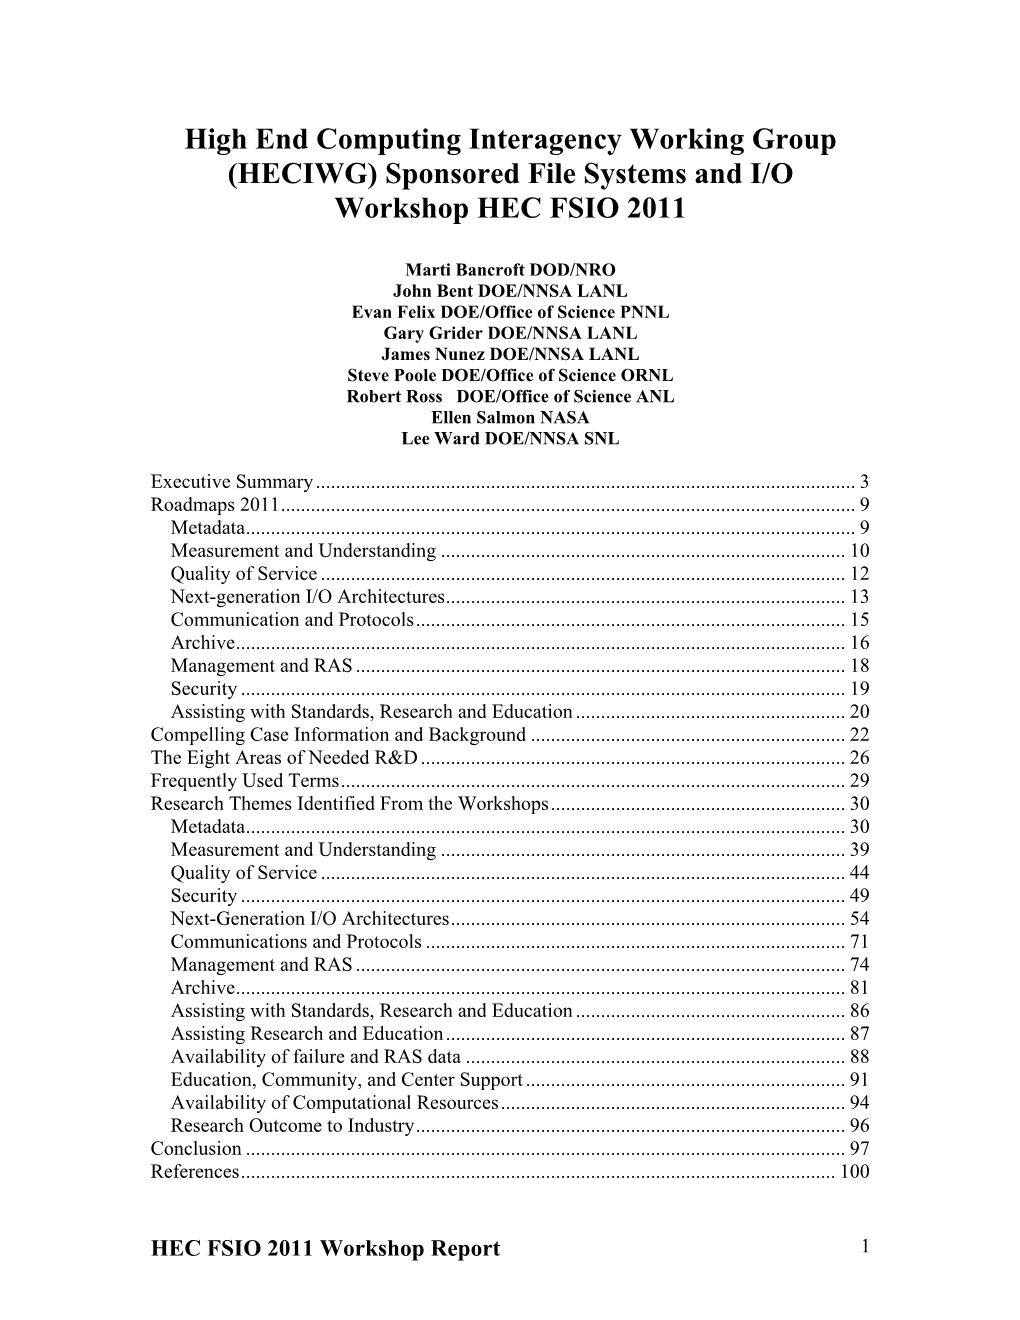 High End Computing Interagency Working Group (HECIWG) Sponsored File Systems and I/O Workshop HEC FSIO 2011